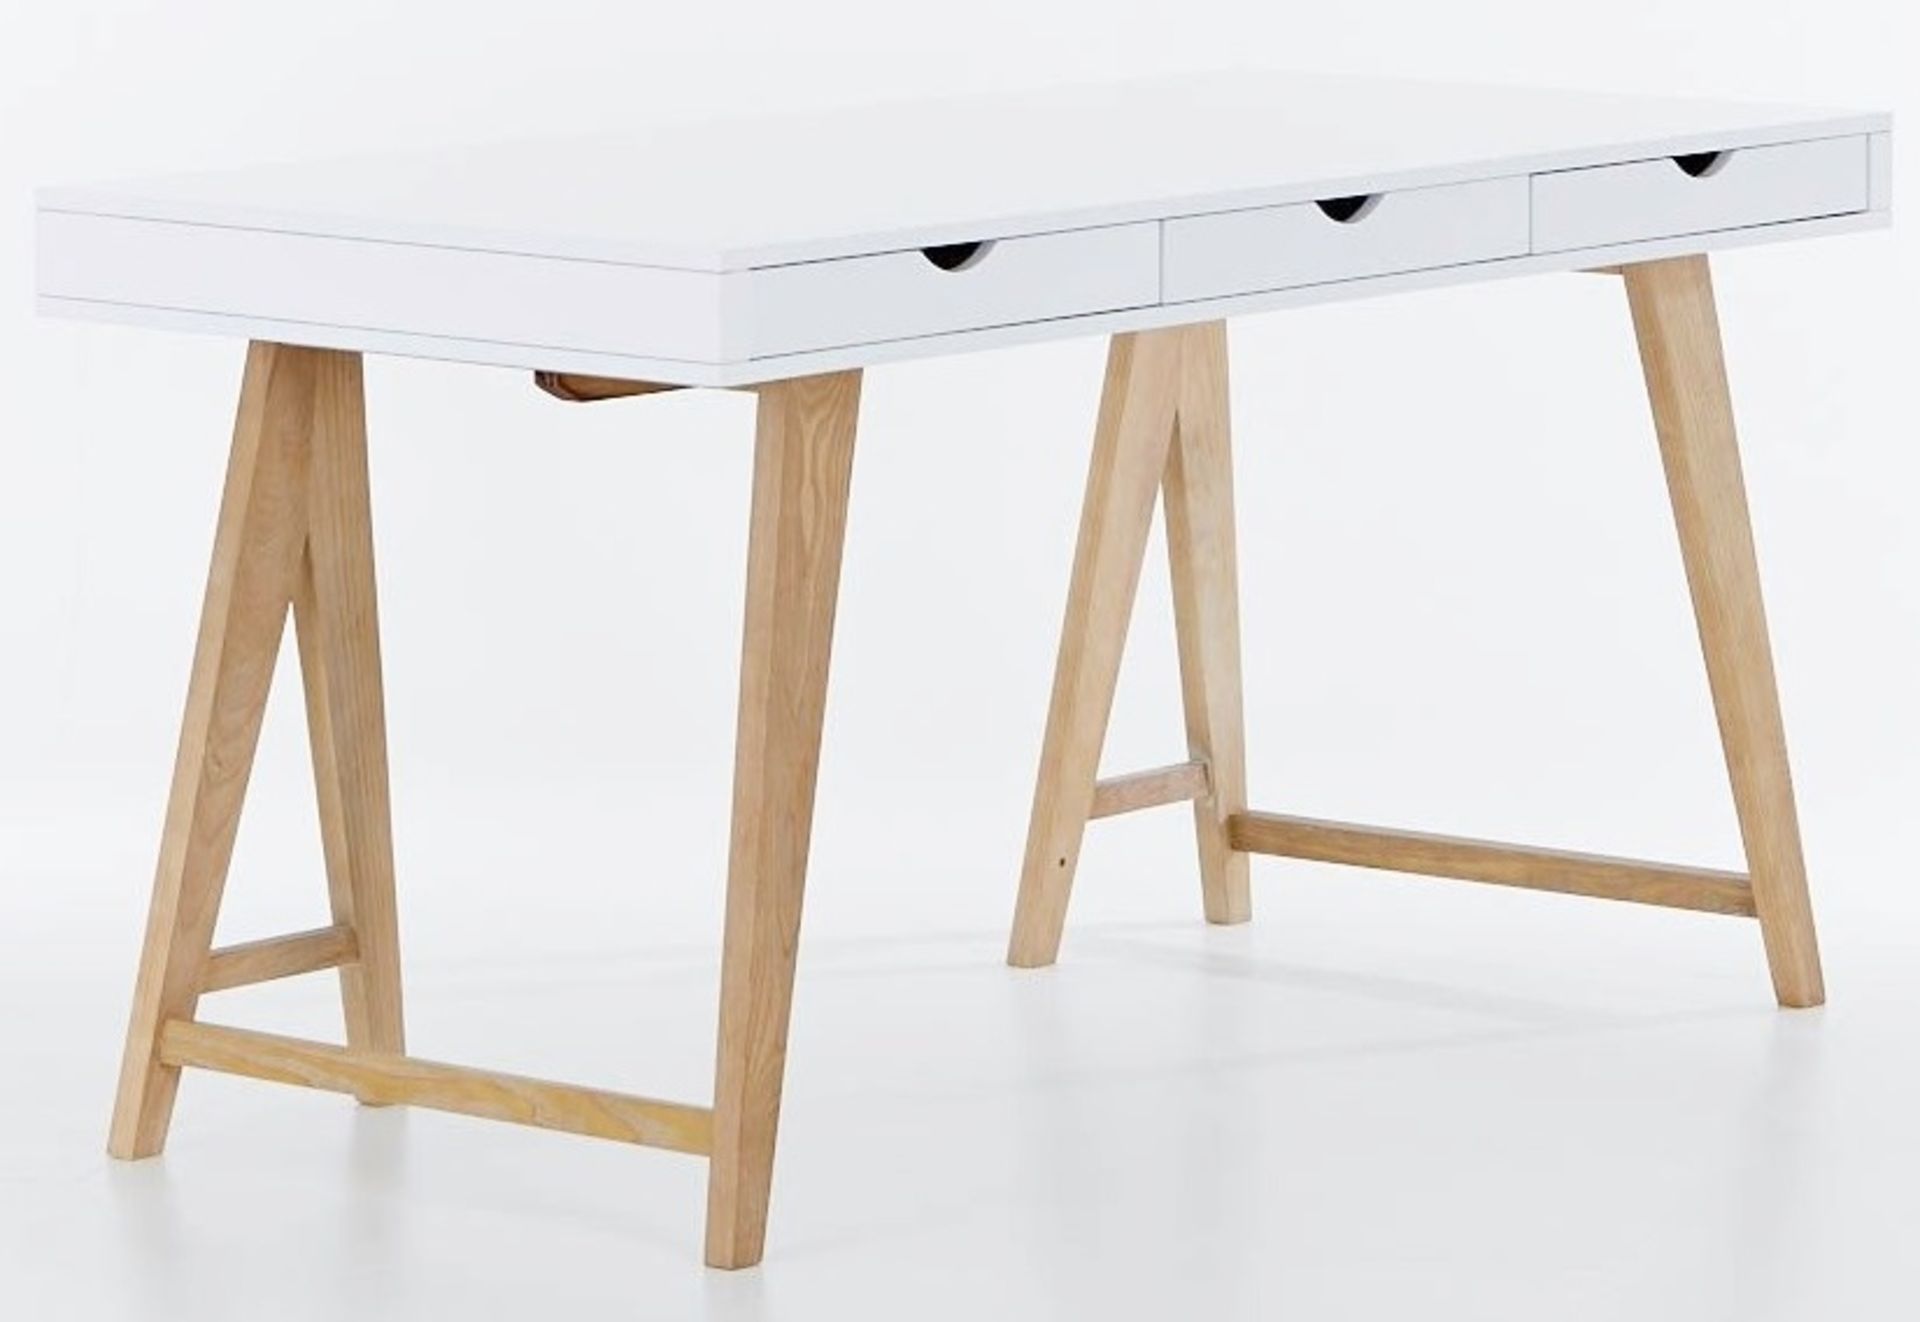 1 x Blue Suntree Ellwood Trestle Desk With a White Finish, Oak Legs and Three Storage Drawers - H76 - Image 3 of 3